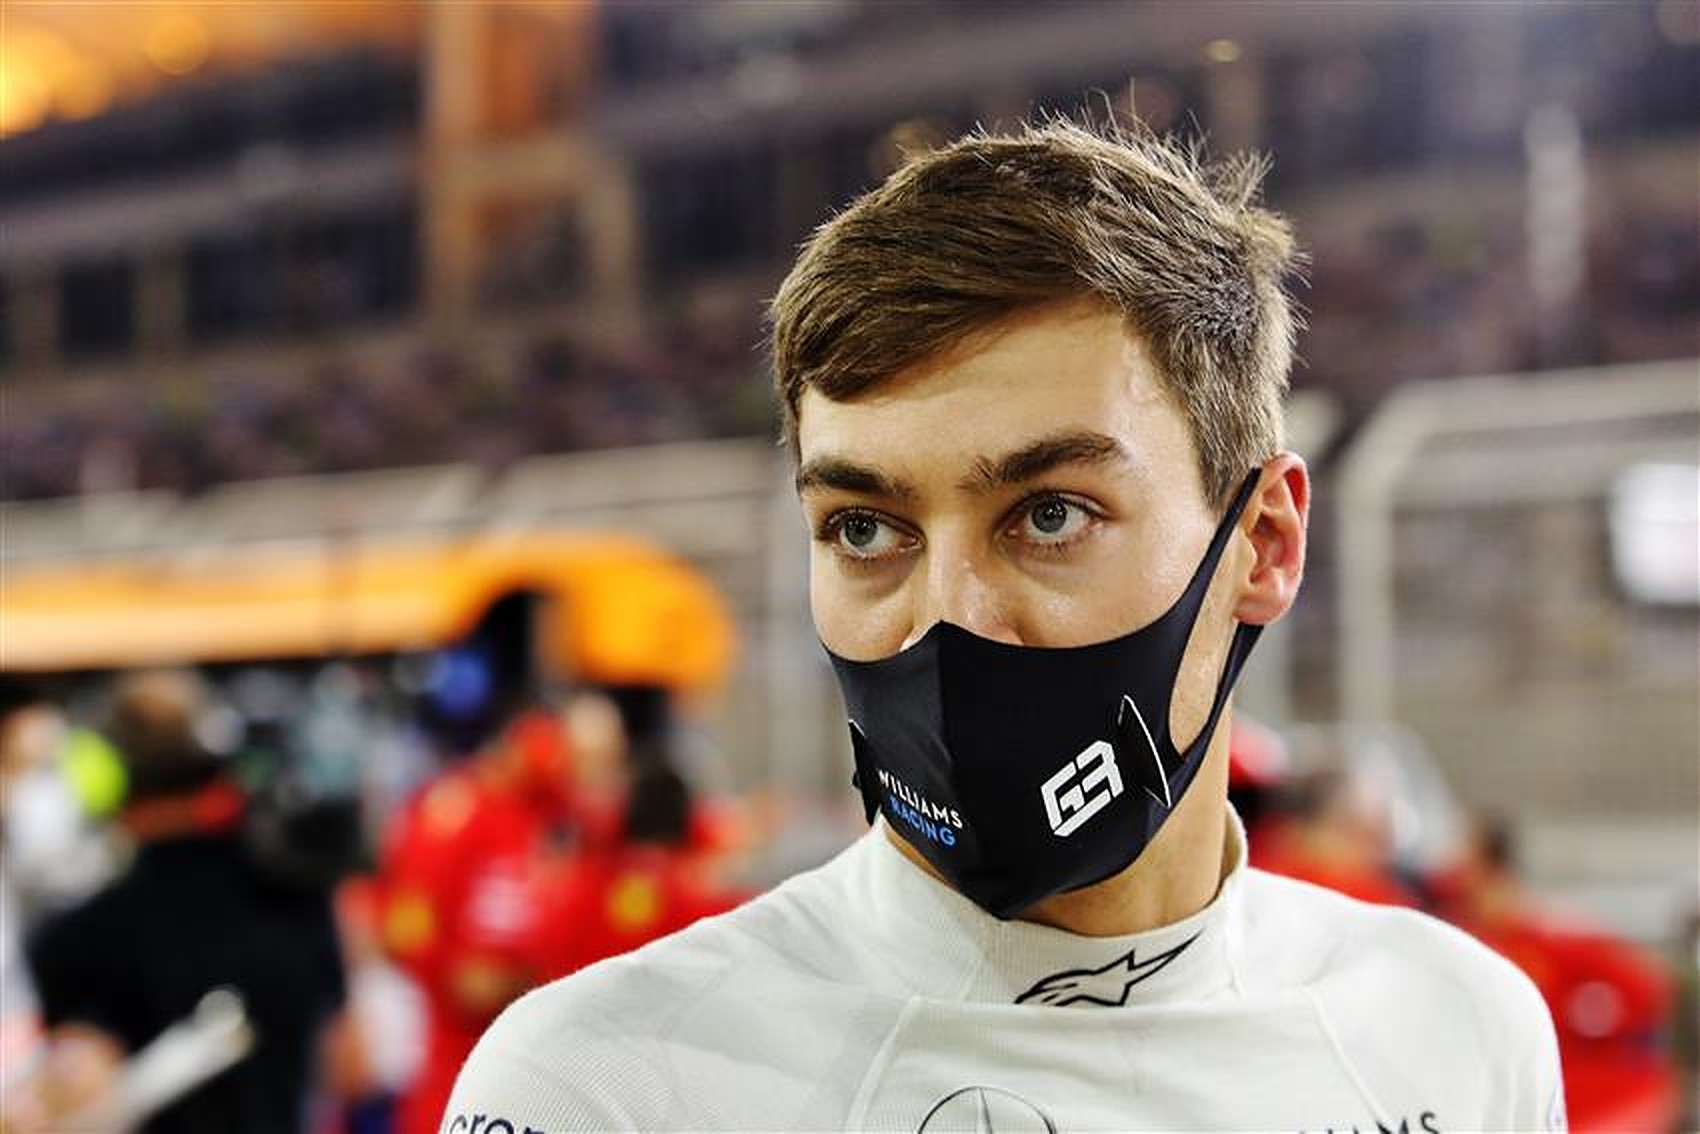 George Russell Mercedes 2021 - Formula1News.co.uk